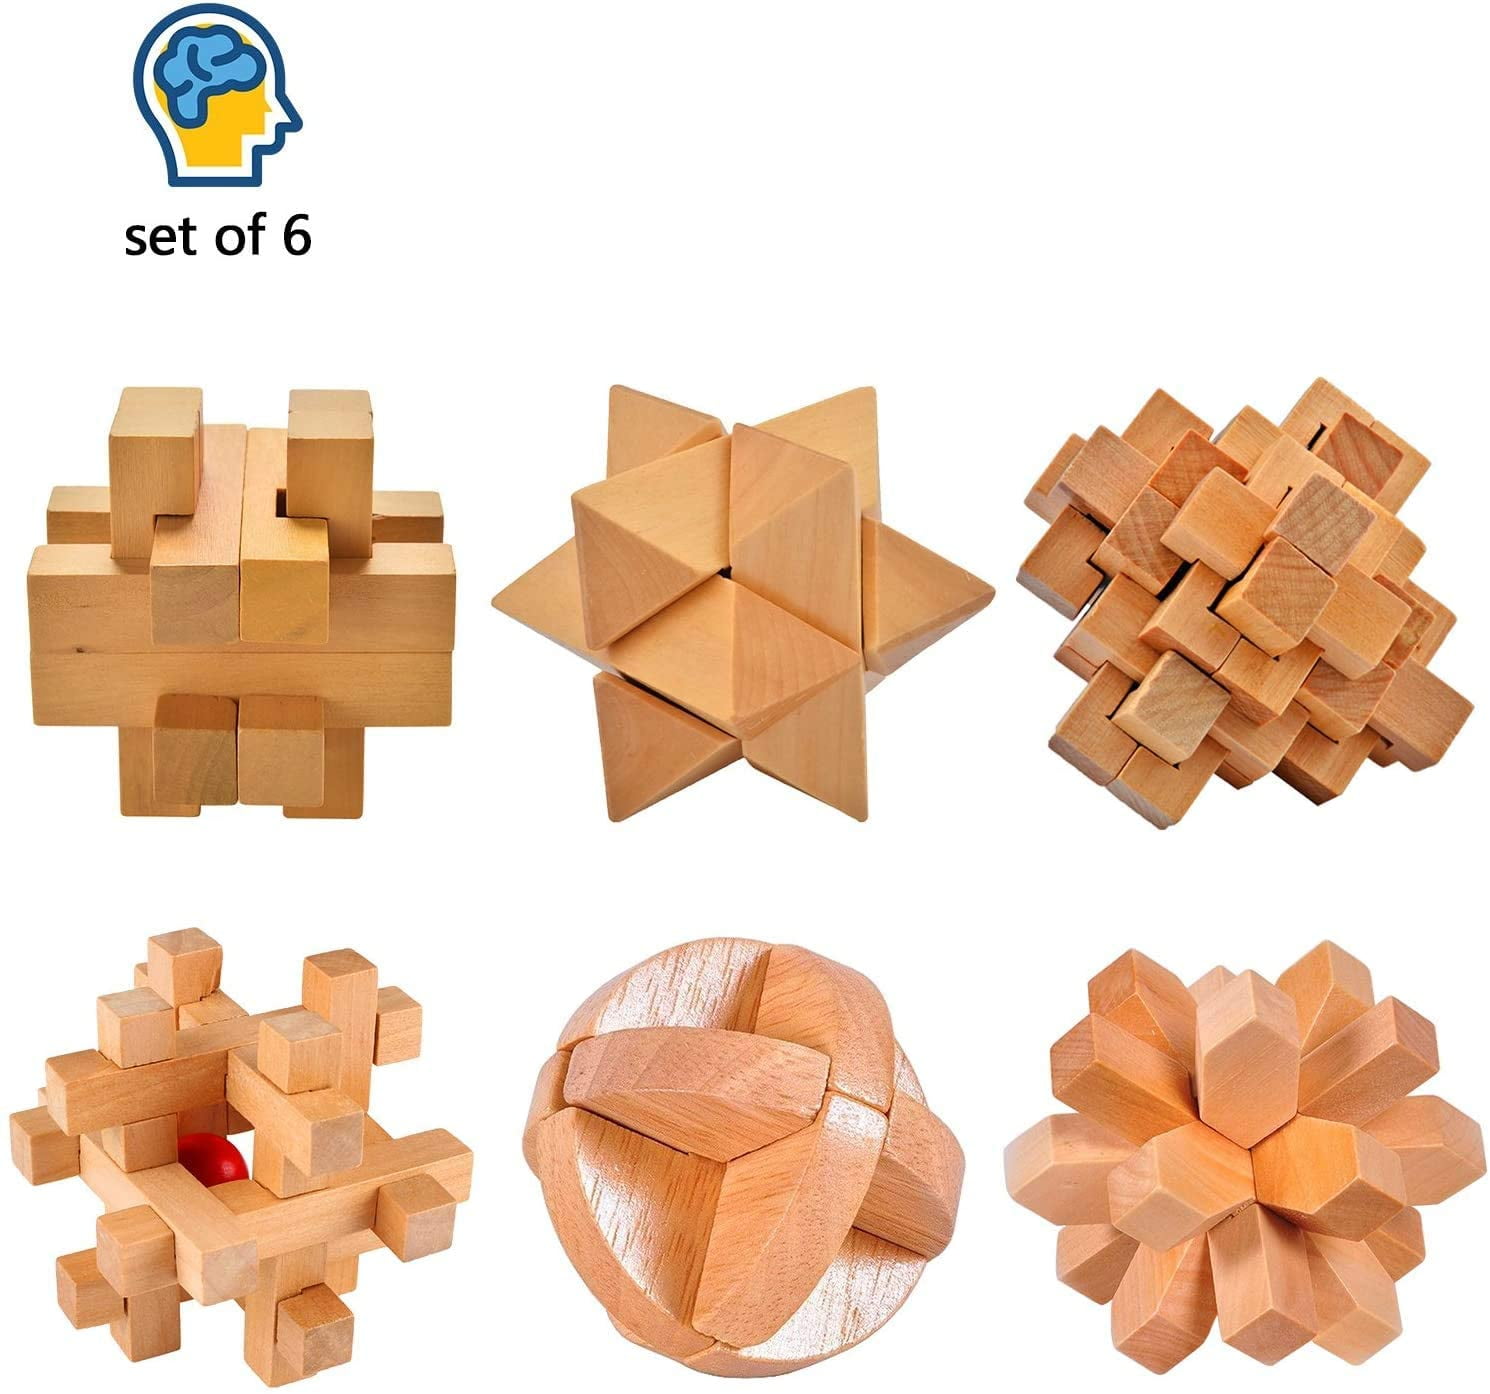 uPuzzled Fillmore's Large Wooden 3D Diamond Puzzle Adult Brainteaser -  Fillmore's Large Wooden 3D Diamond Puzzle Adult Brainteaser . shop for  uPuzzled products in India.